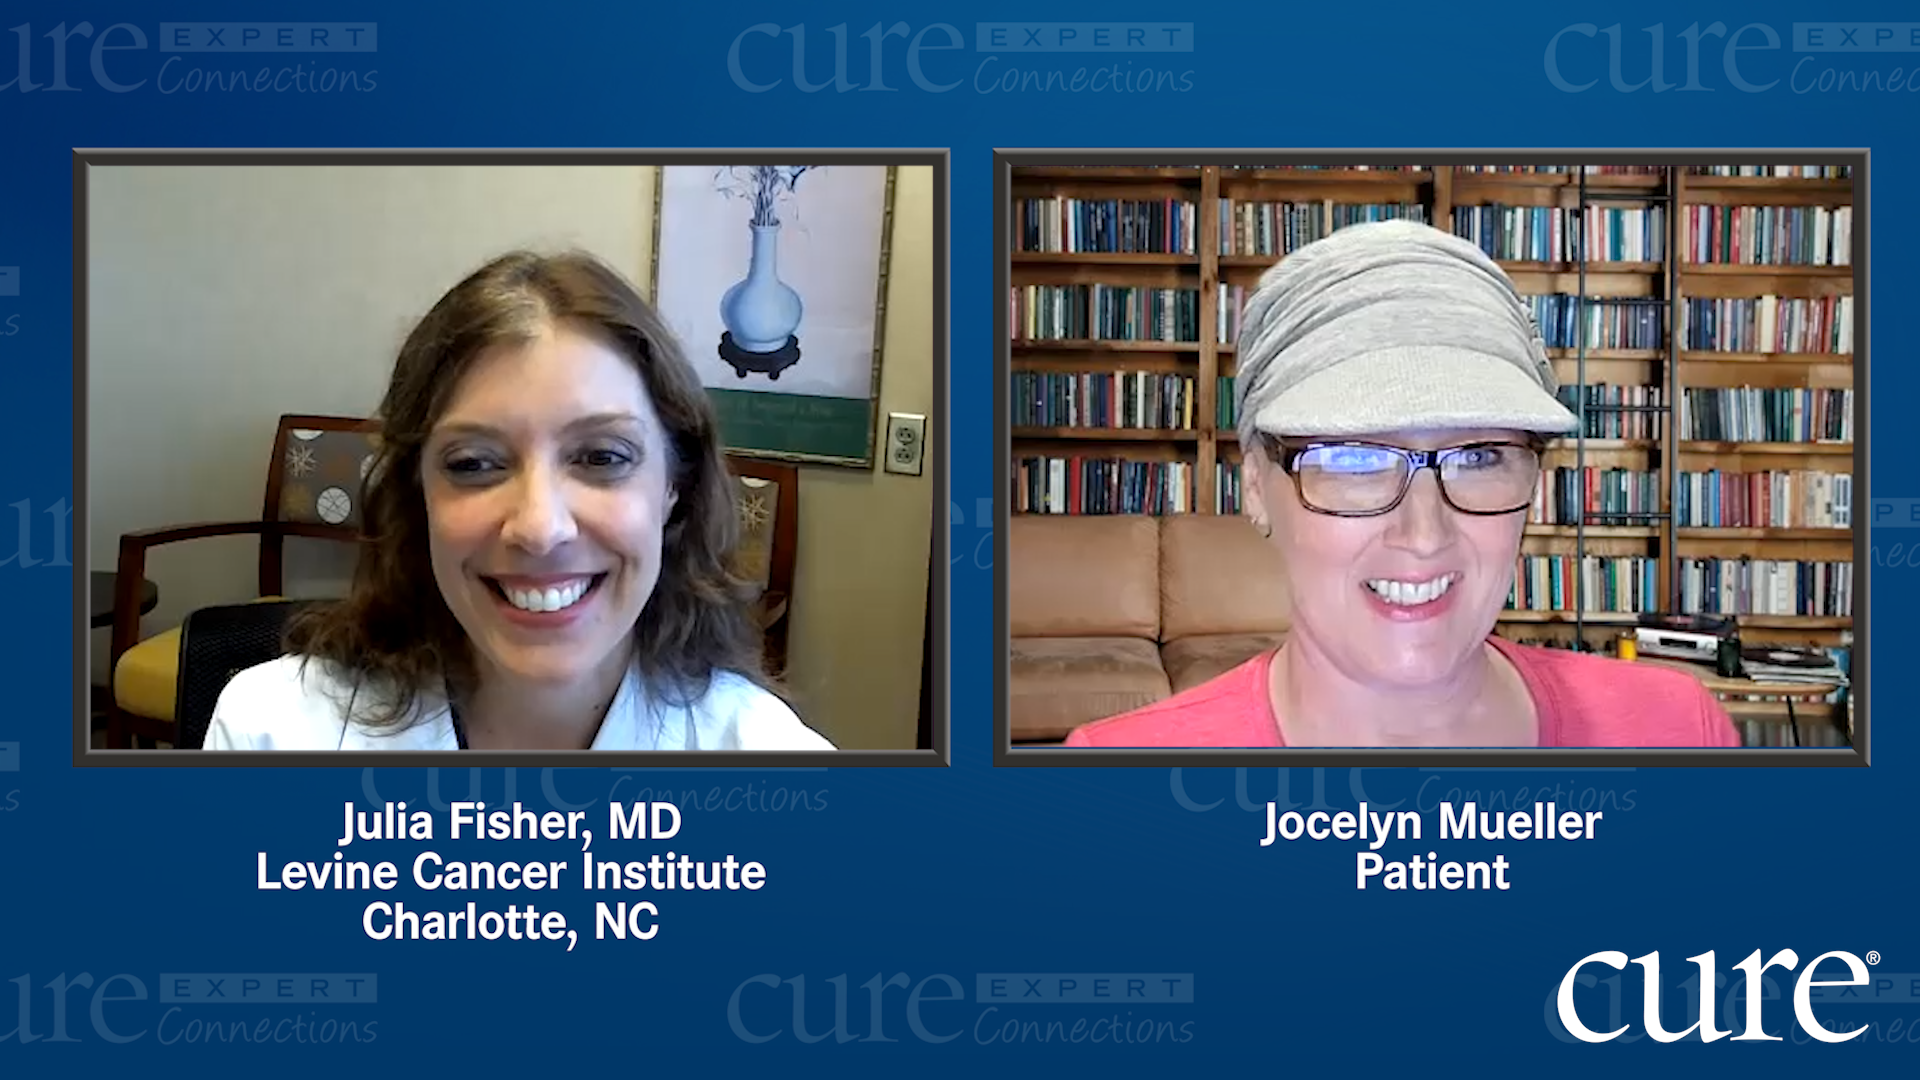 Receiving Treatment for HER2-positive Breast Cancer: The Patient Experience